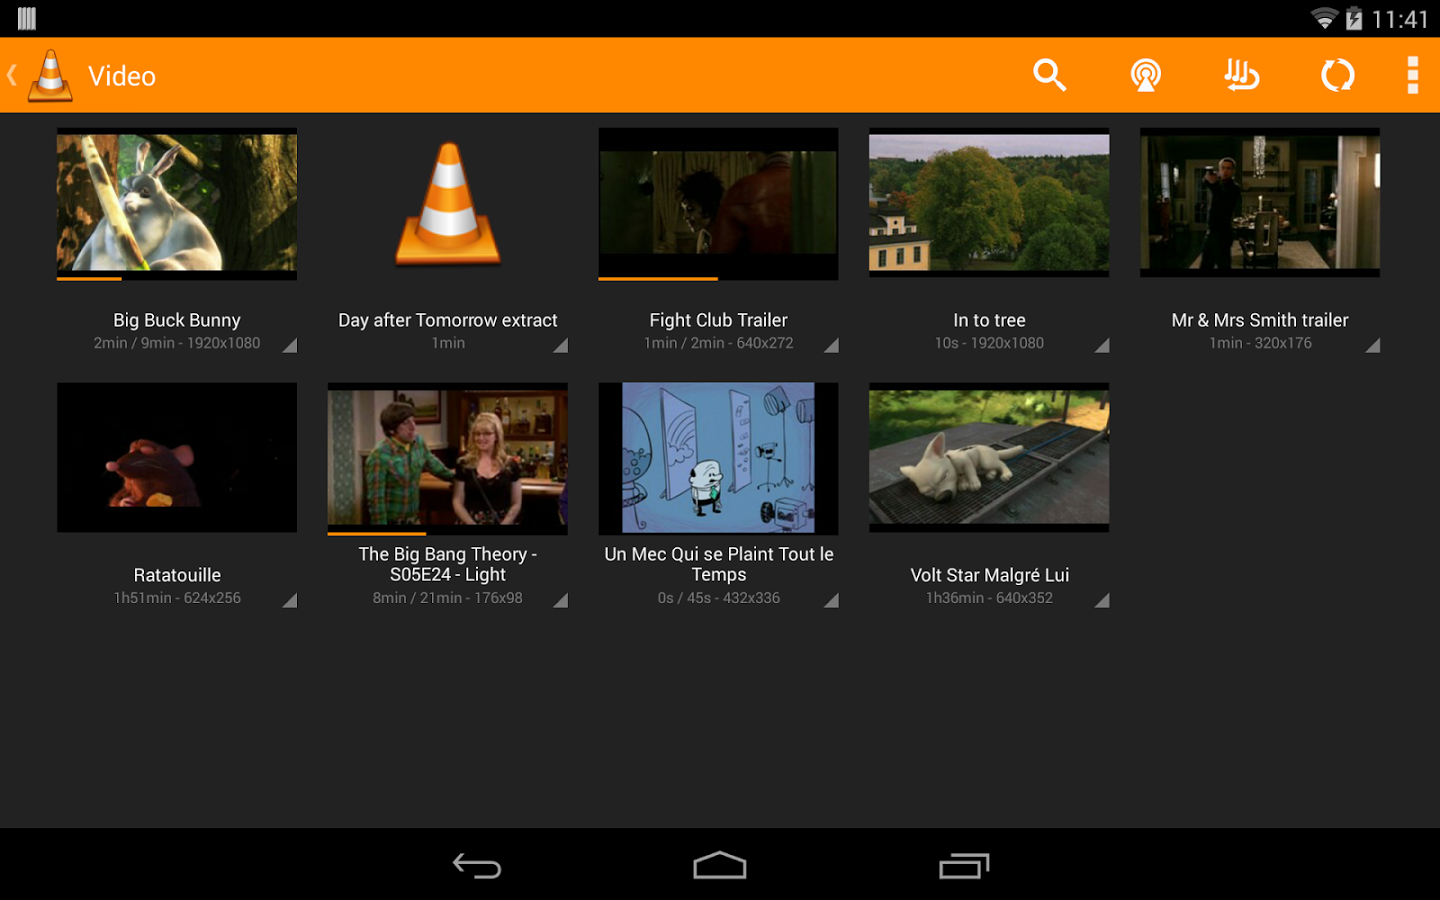 youtube to vlc download